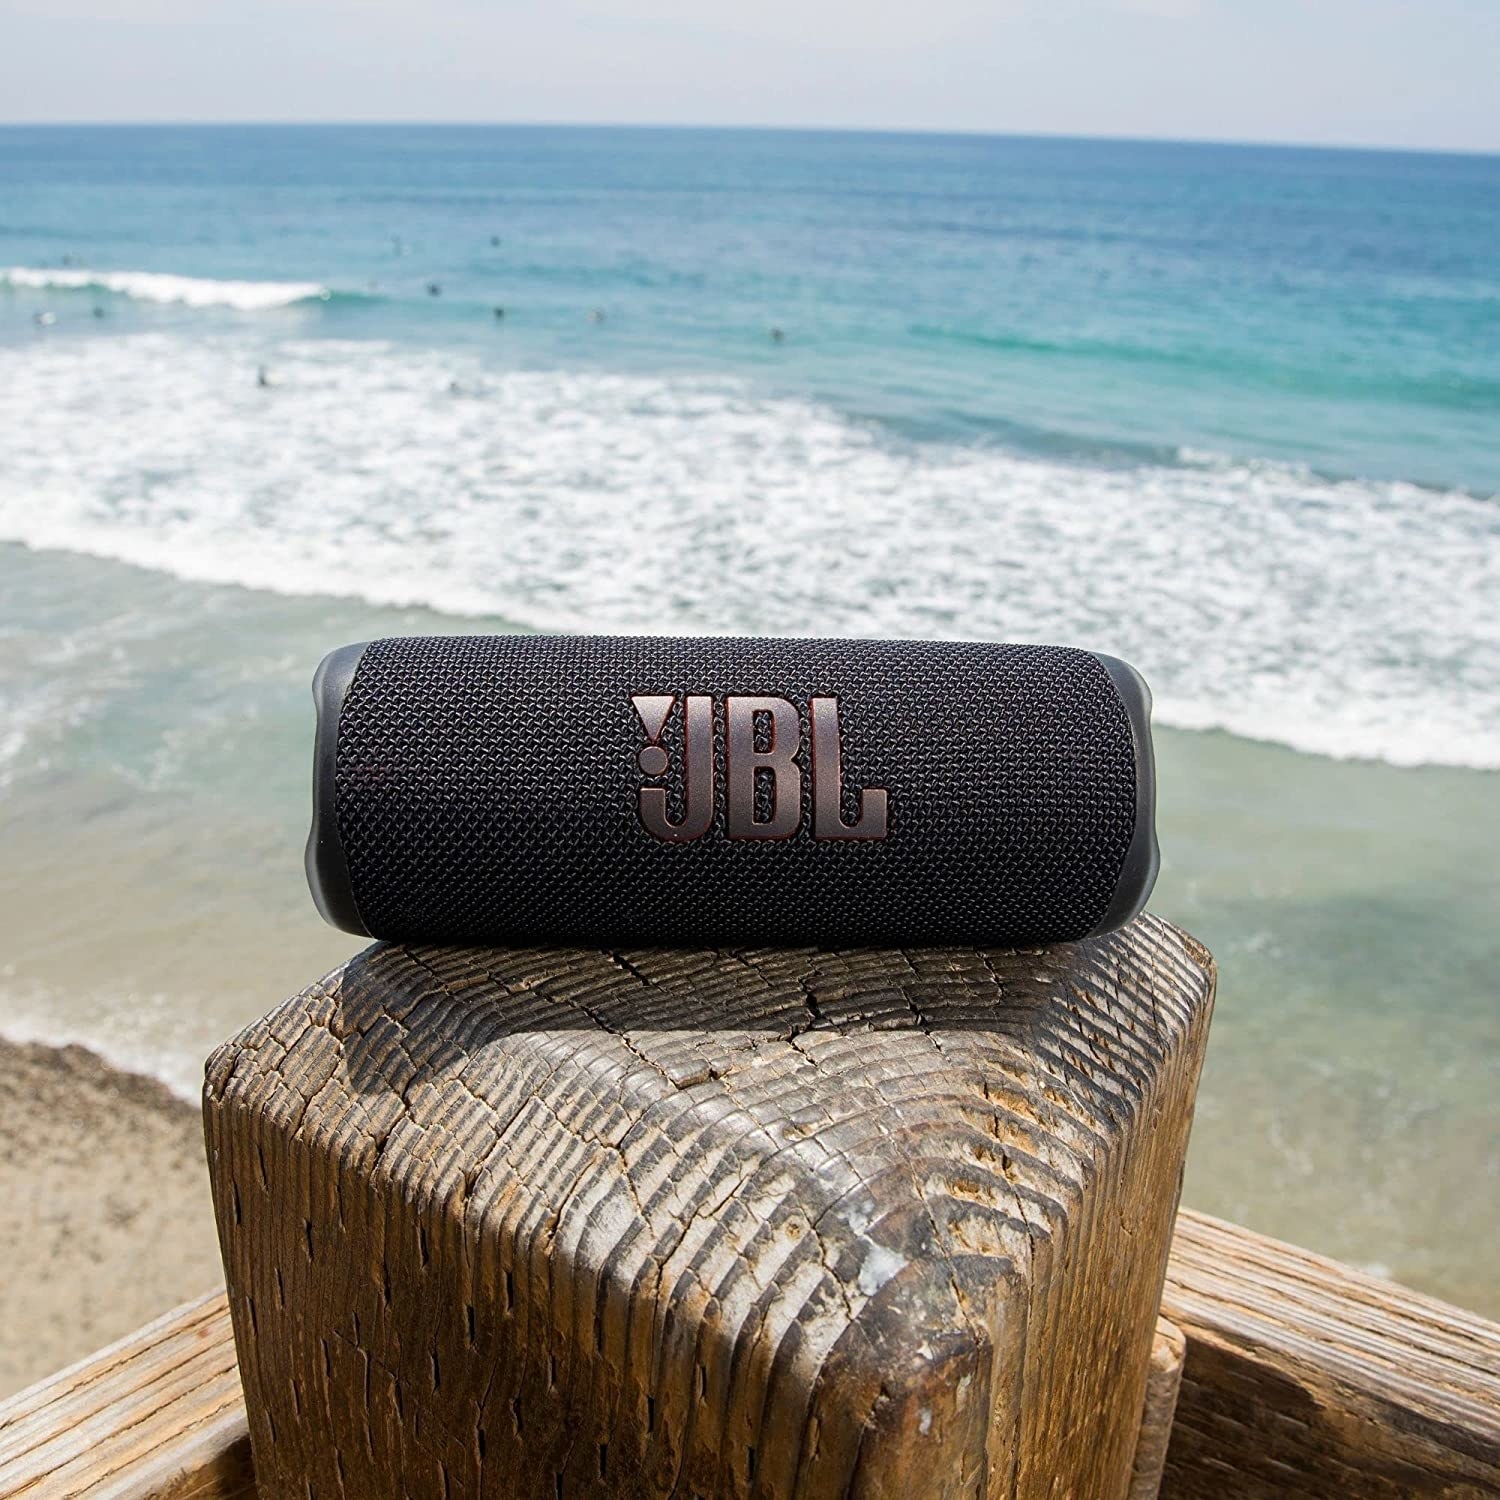 The speaker in front of a beach